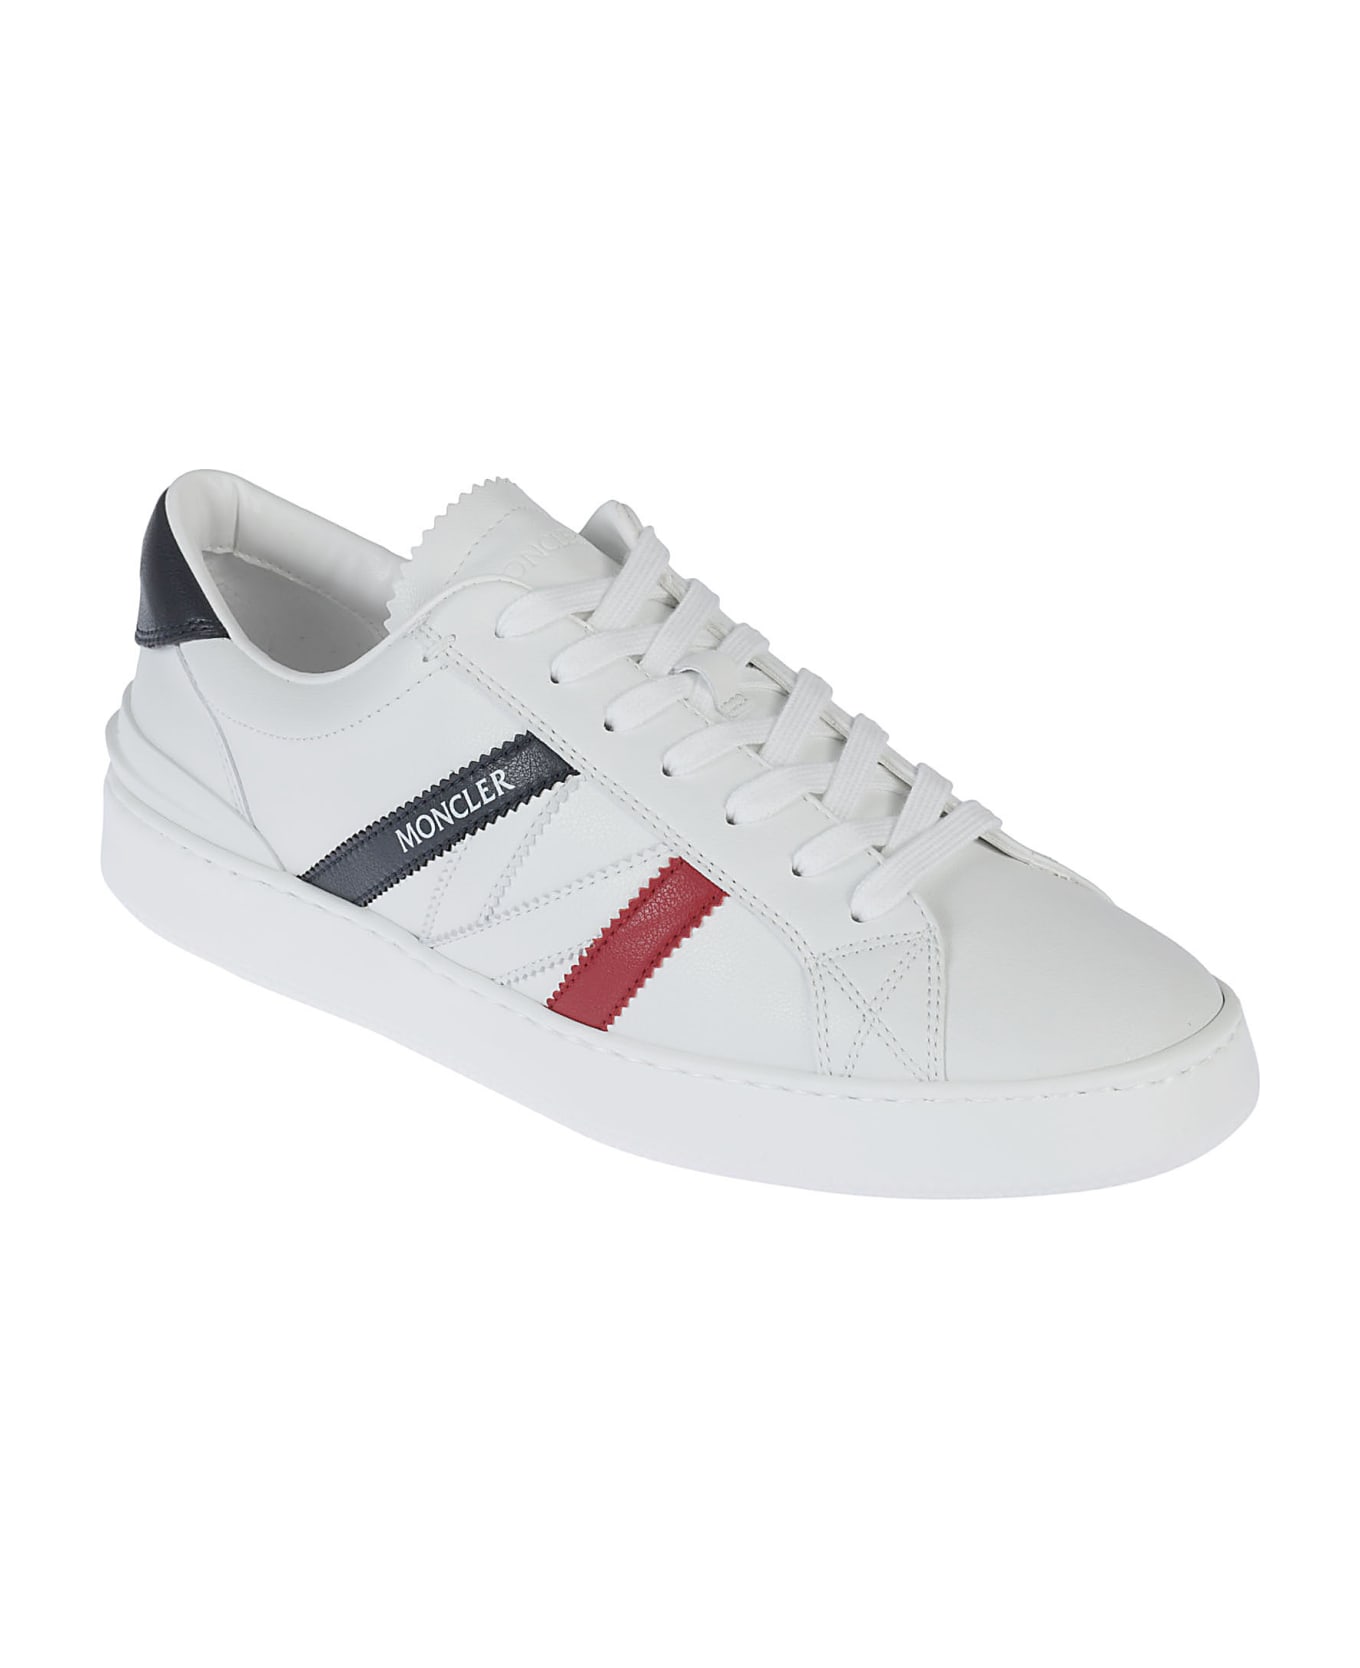 Moncler Logo Printed Lace-up Sneakers - WHITE/BLUE/RED